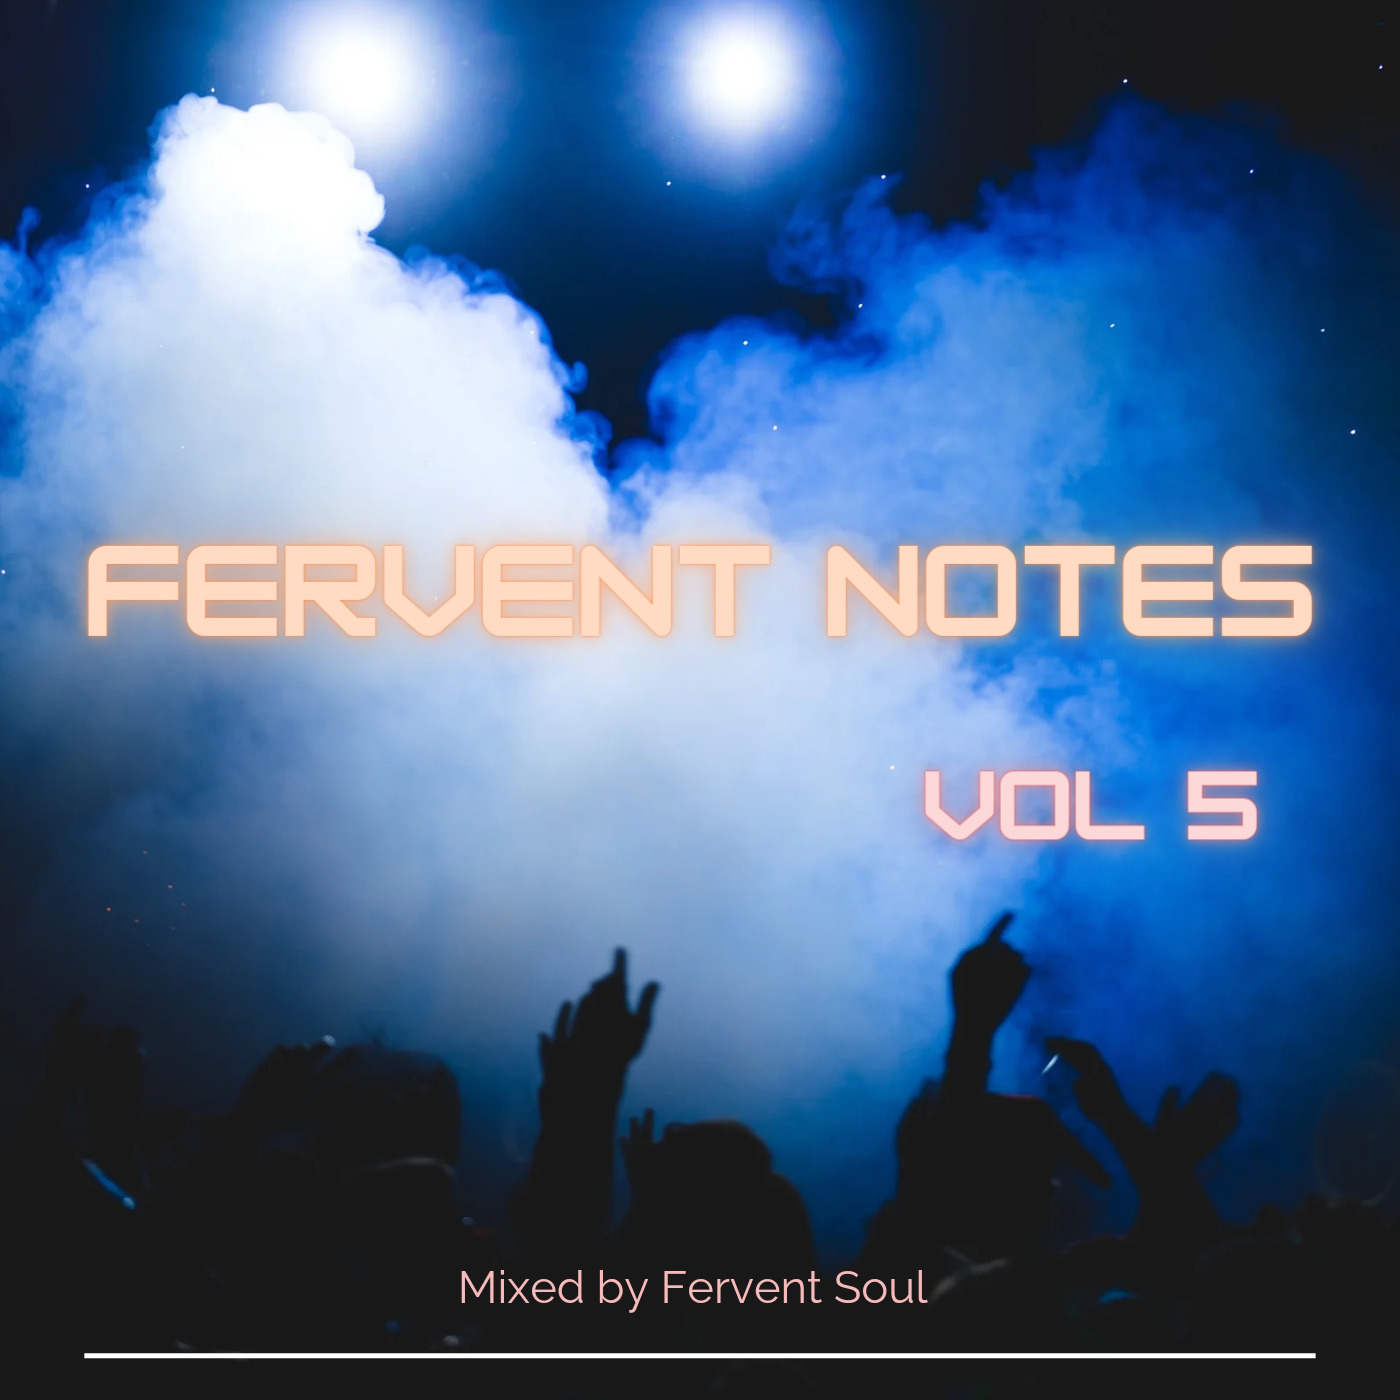 Fervent Notes Vol. 5 (1 Hour Special) Mixed By Fervent Soul